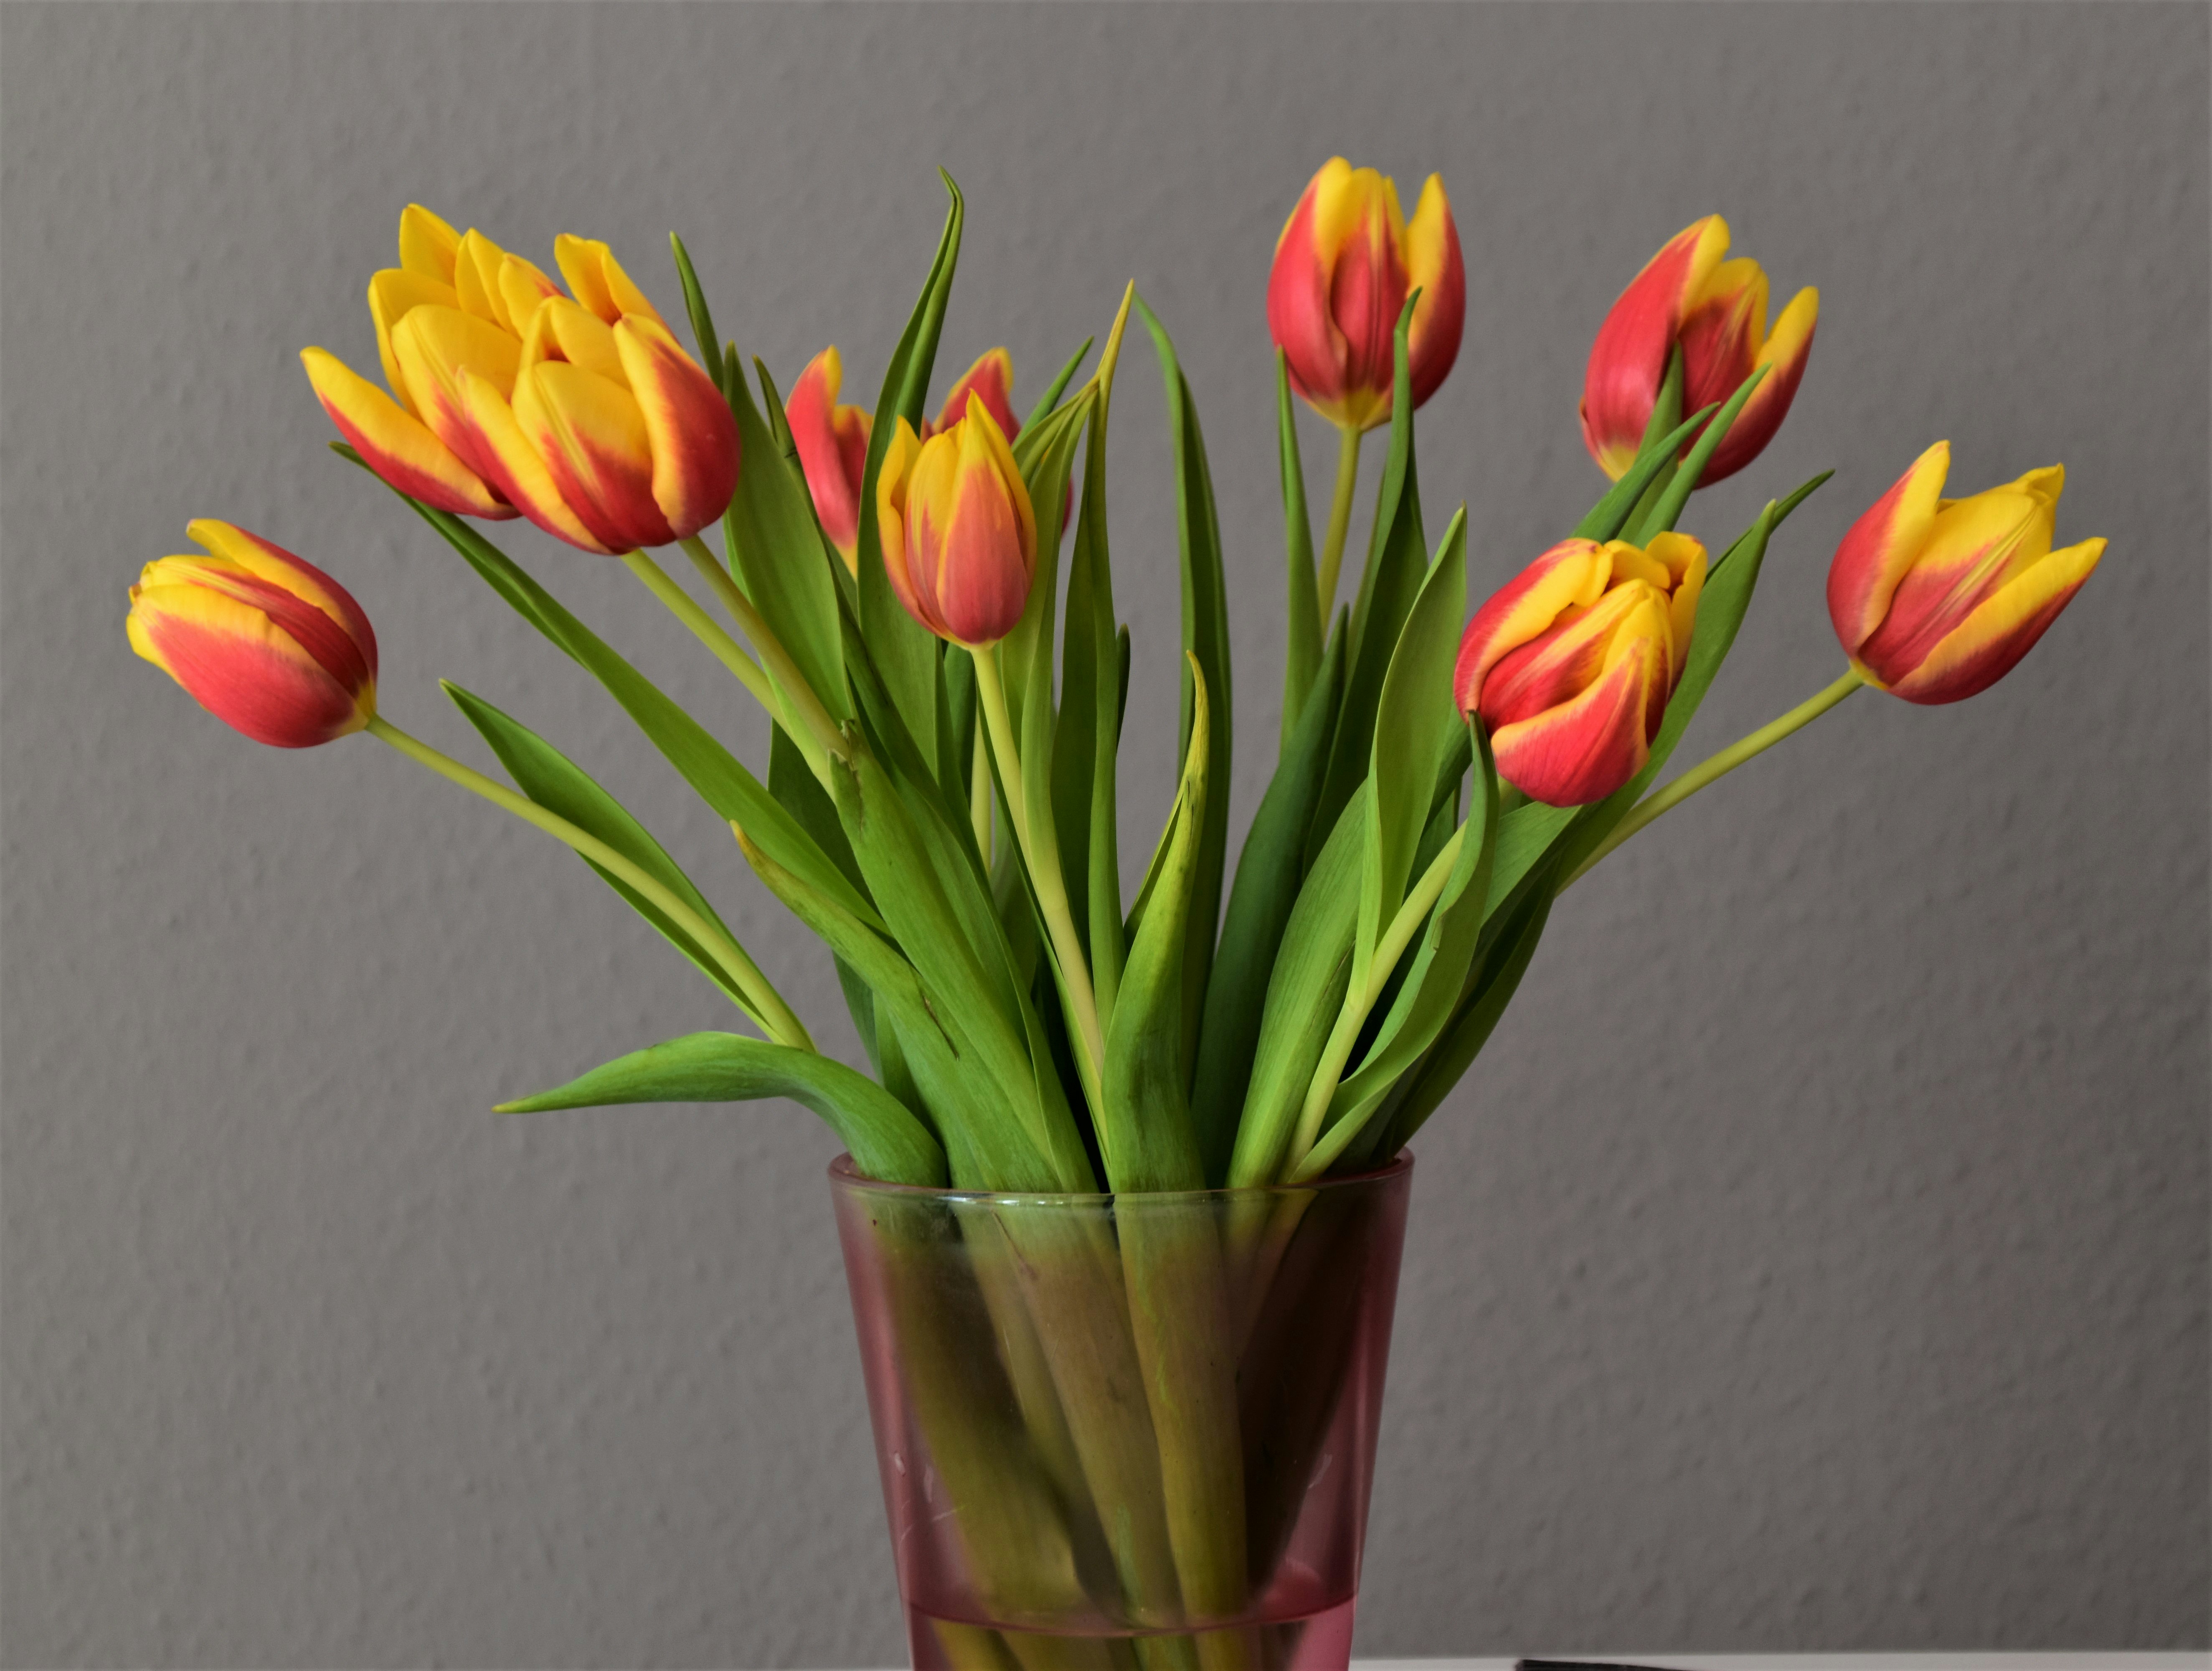 red and yellow tulips in green glass vase